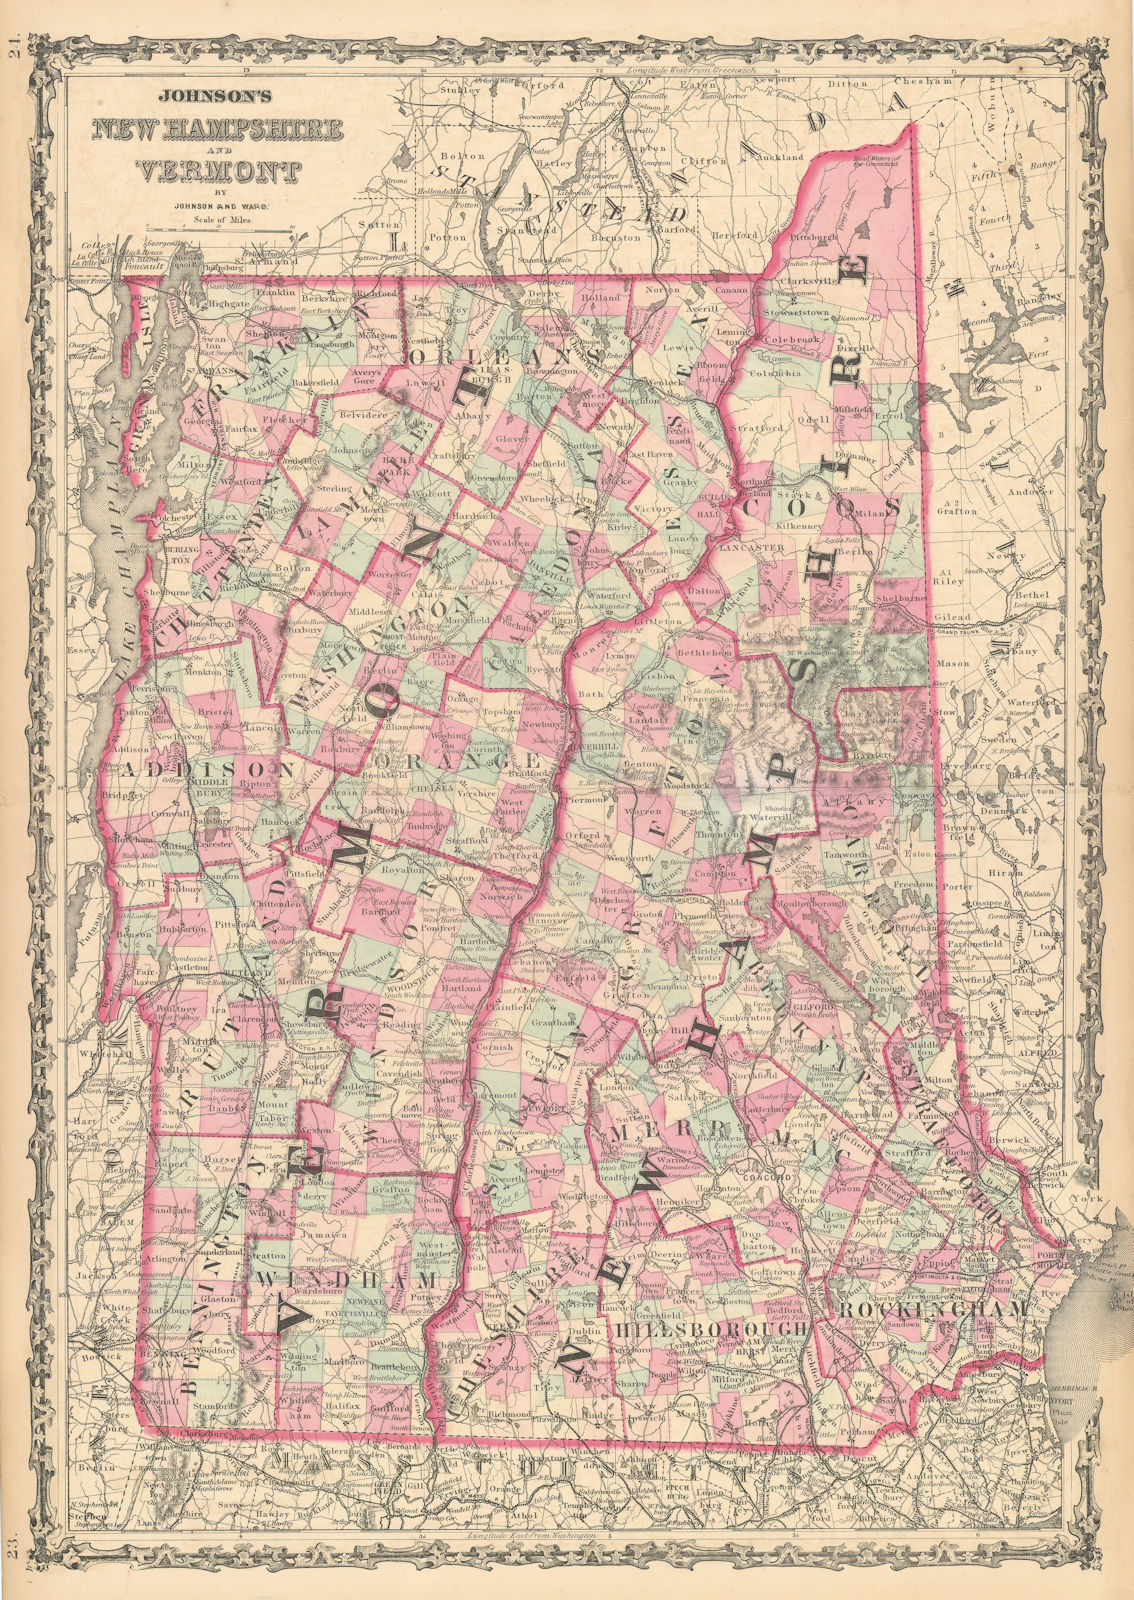 Associate Product Johnson's New Hampshire & Vermont. US State map showing counties 1862 old